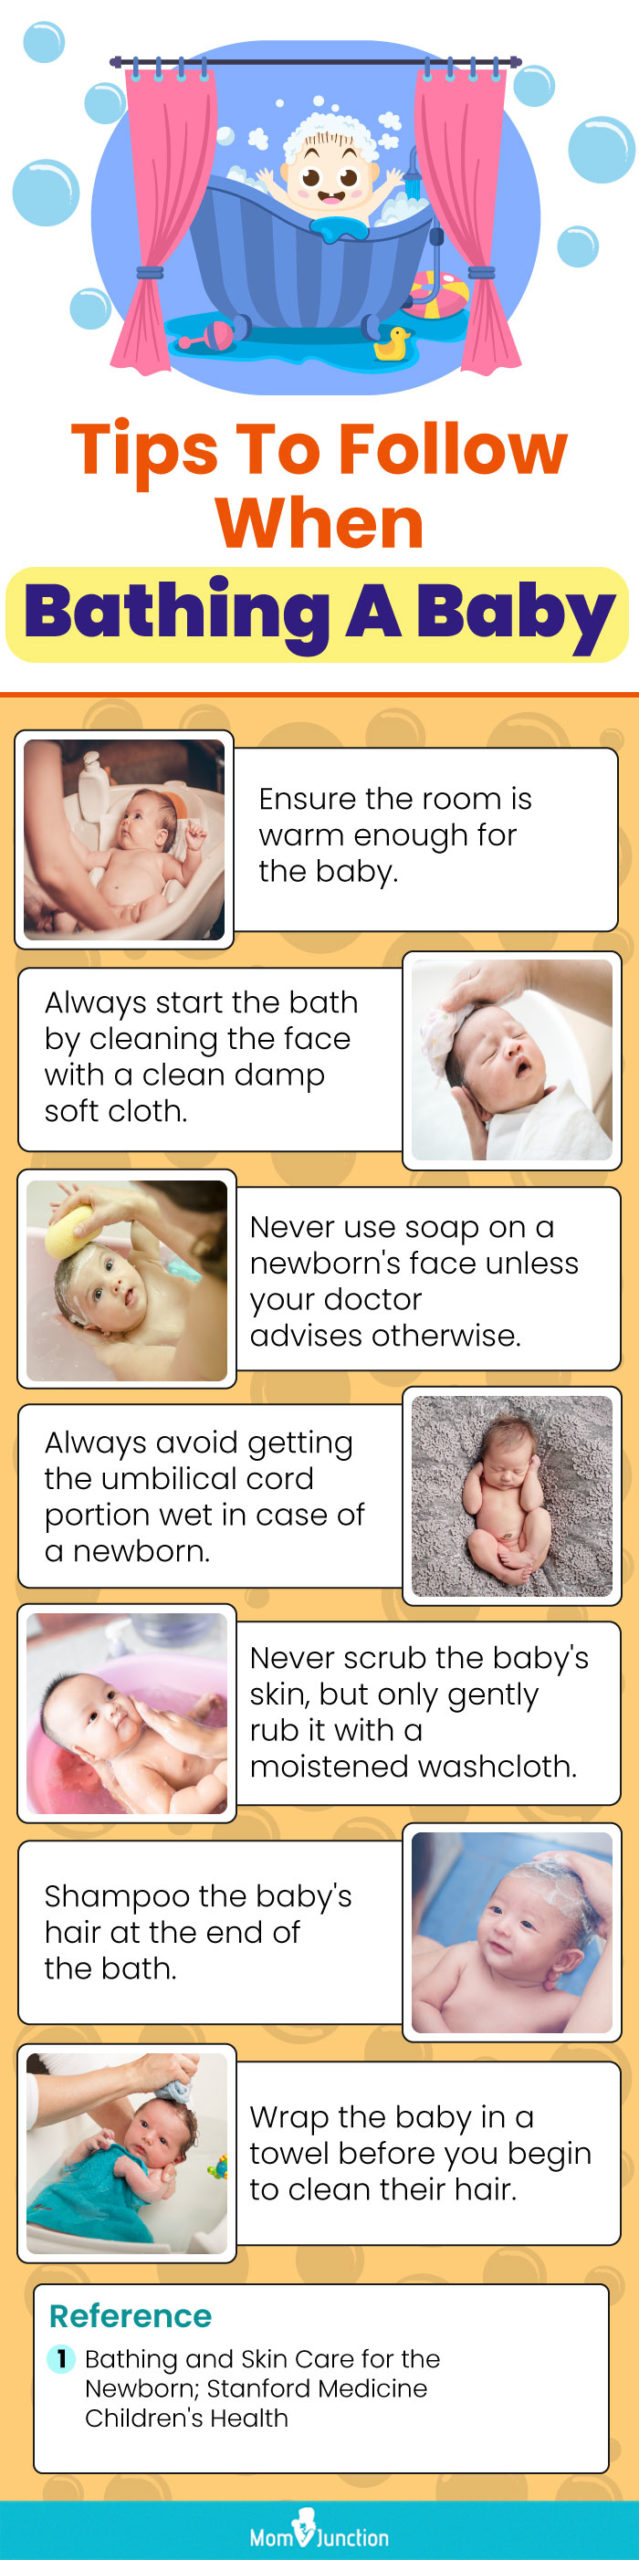 Tips To Follow When Bathing A Baby (infographic)